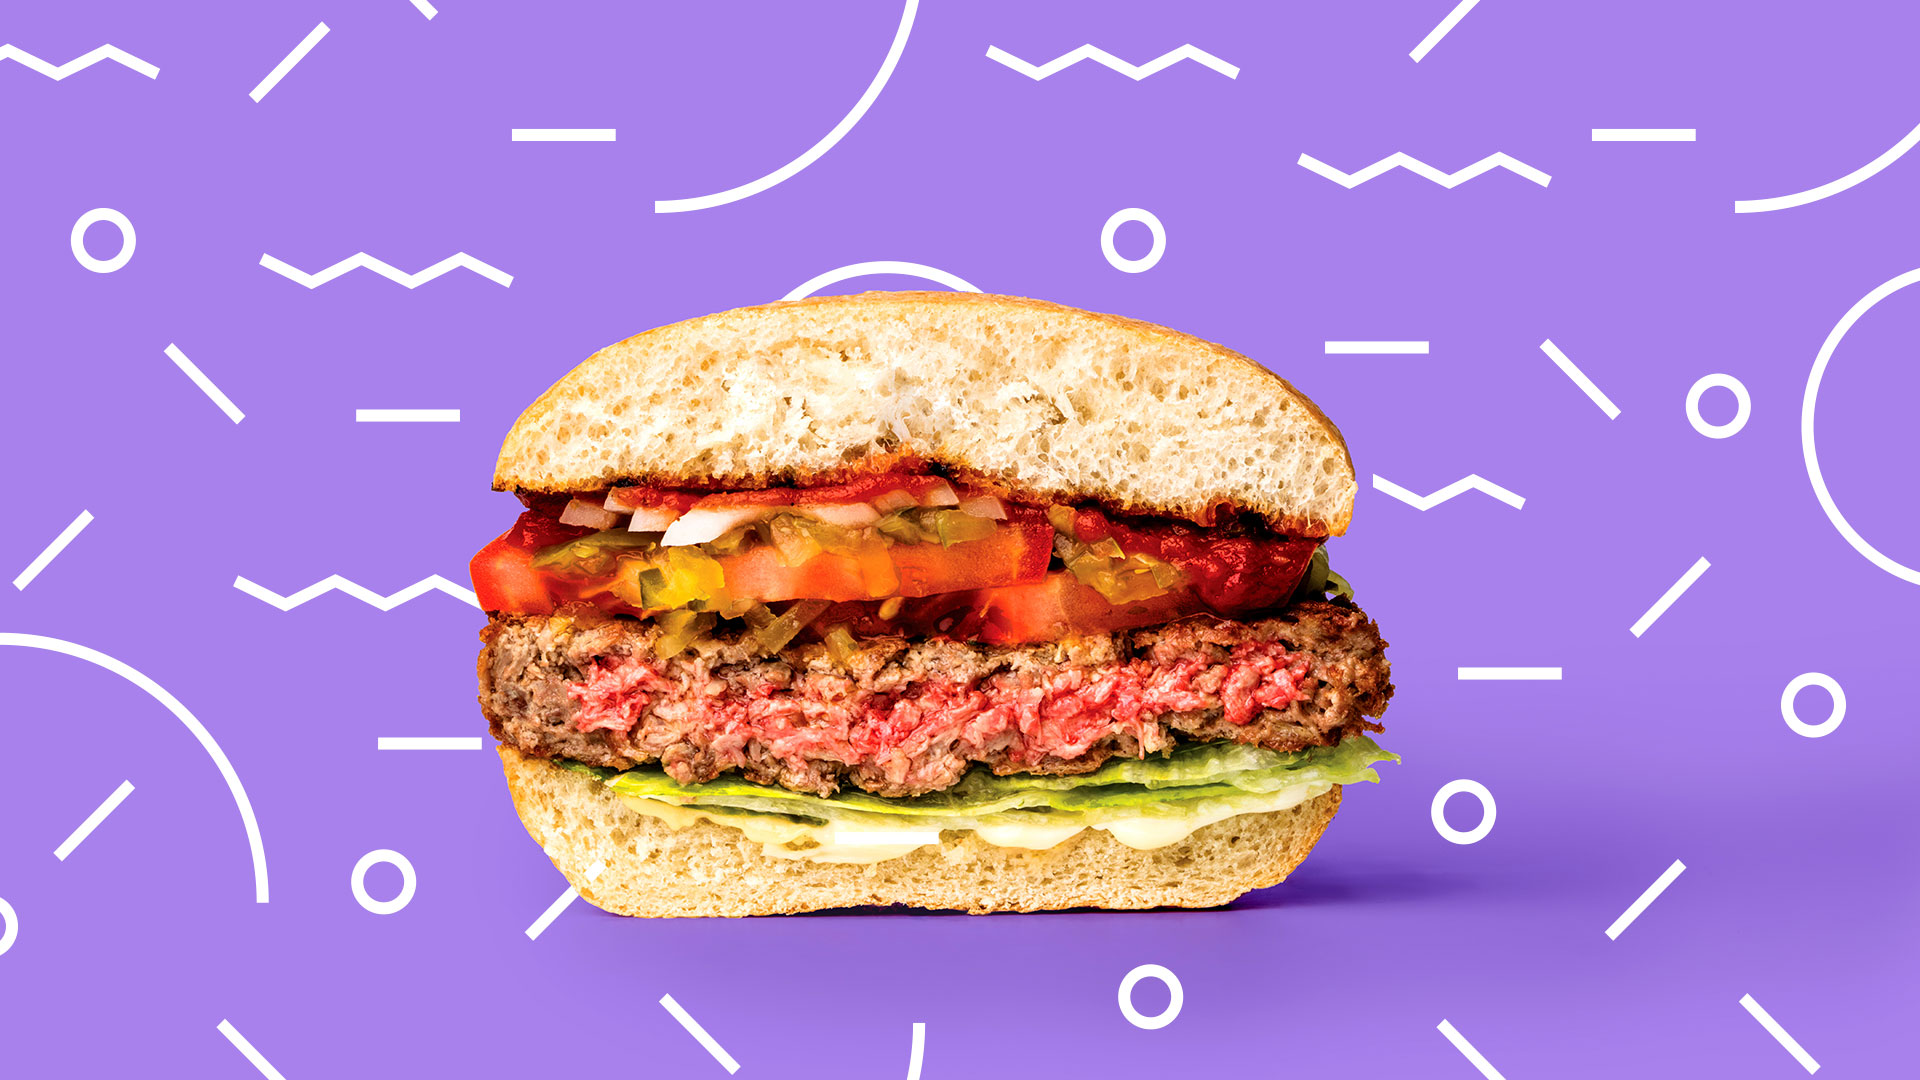 A cross section of an Impossible Burger against a jazzy purple background.